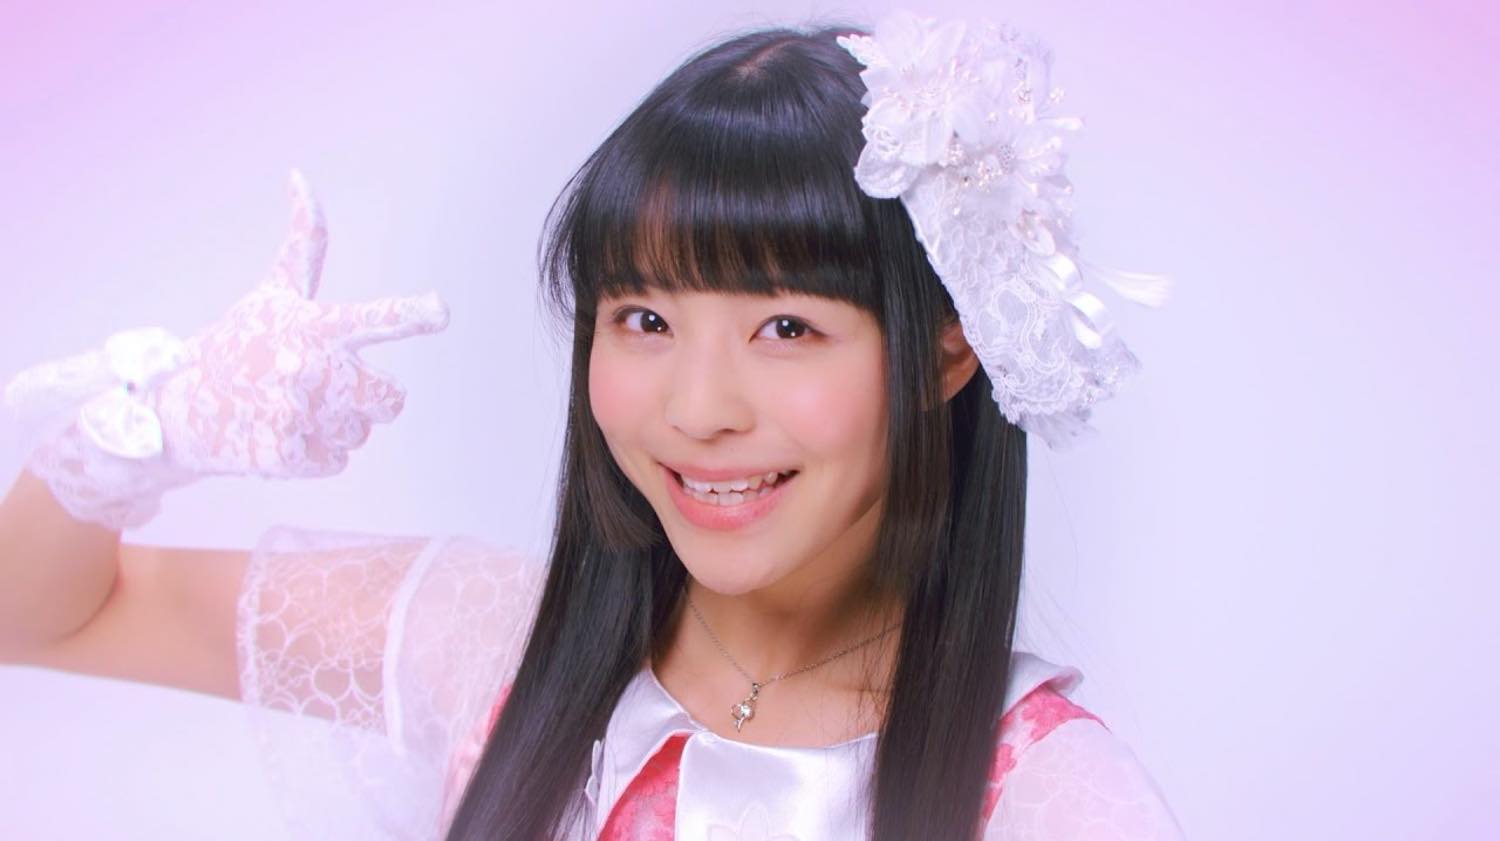 Yufu Terashima is an Absent-minded Angel in the MV for “Tenshi no Telepathy”!